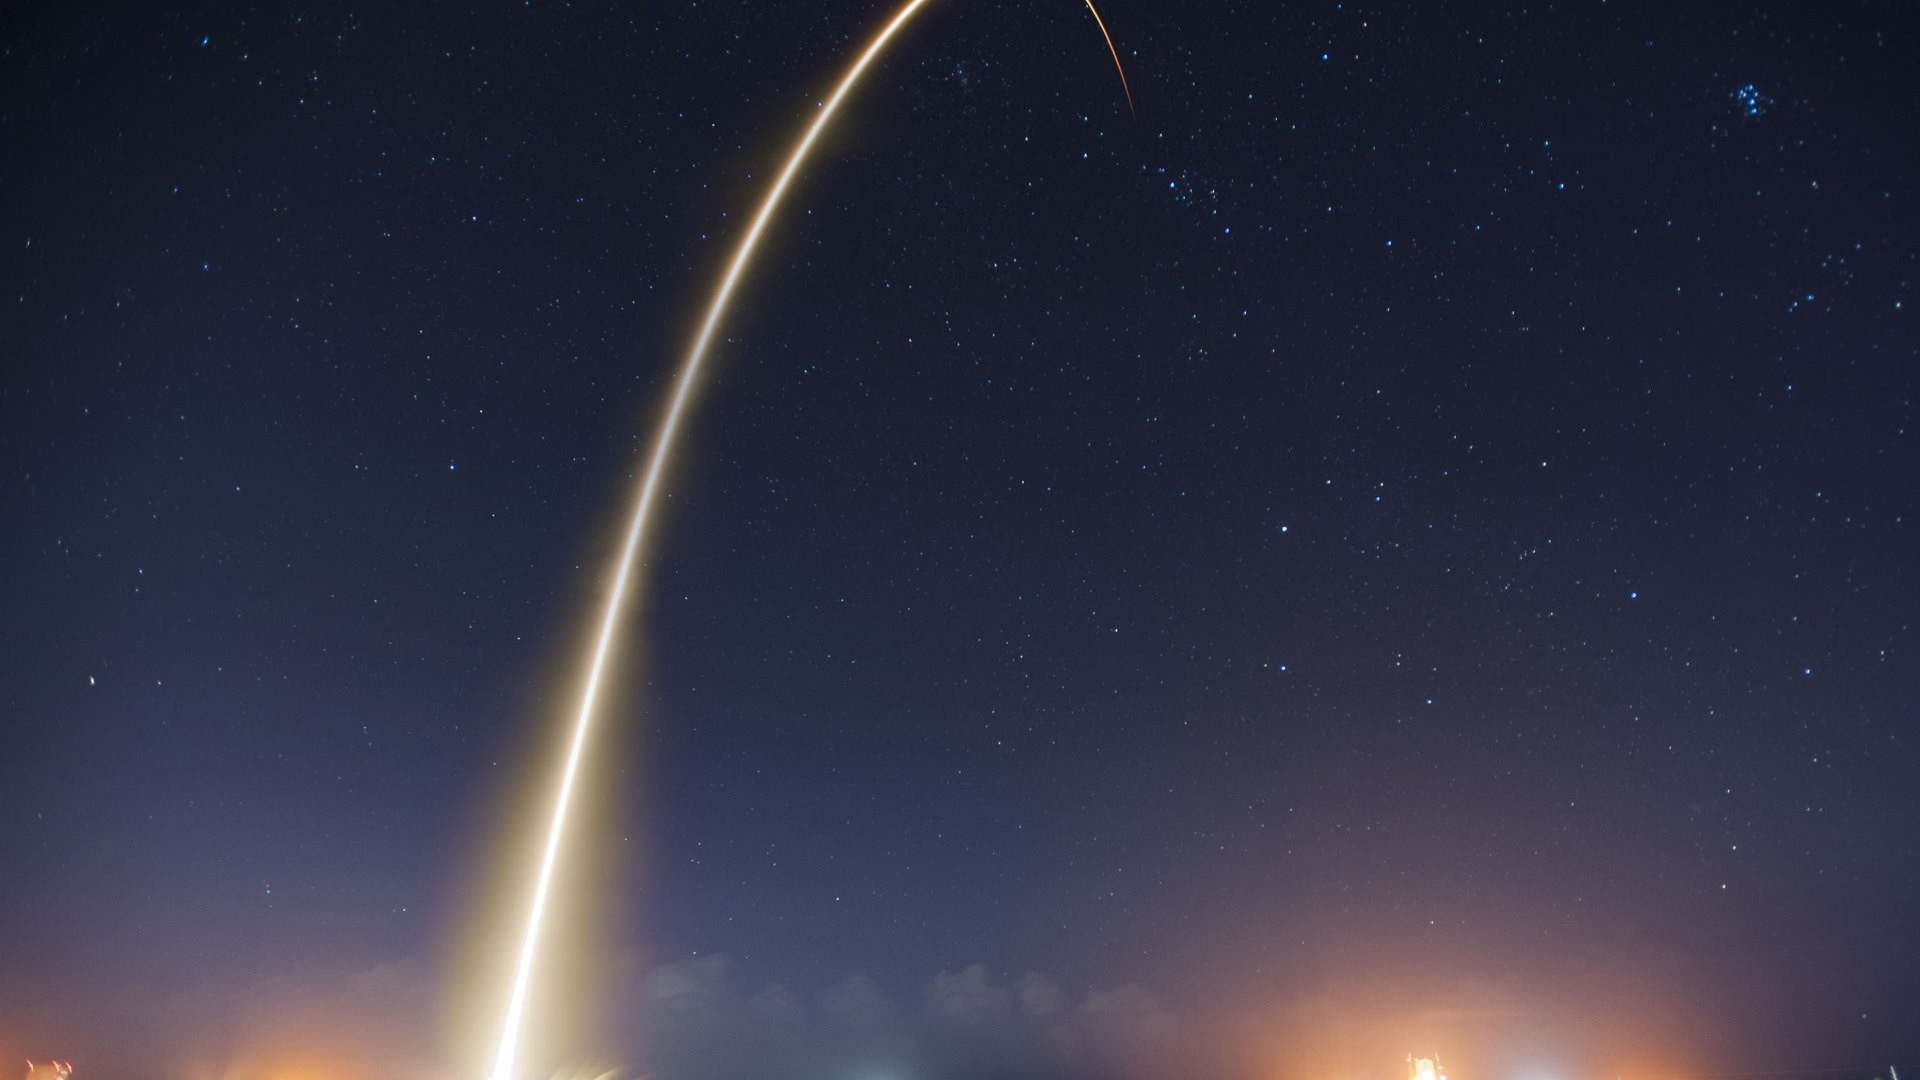 1920x1080 HD Wallpaper: SpaceX's Falcon 9 rocket and Dragon spacecraft launched